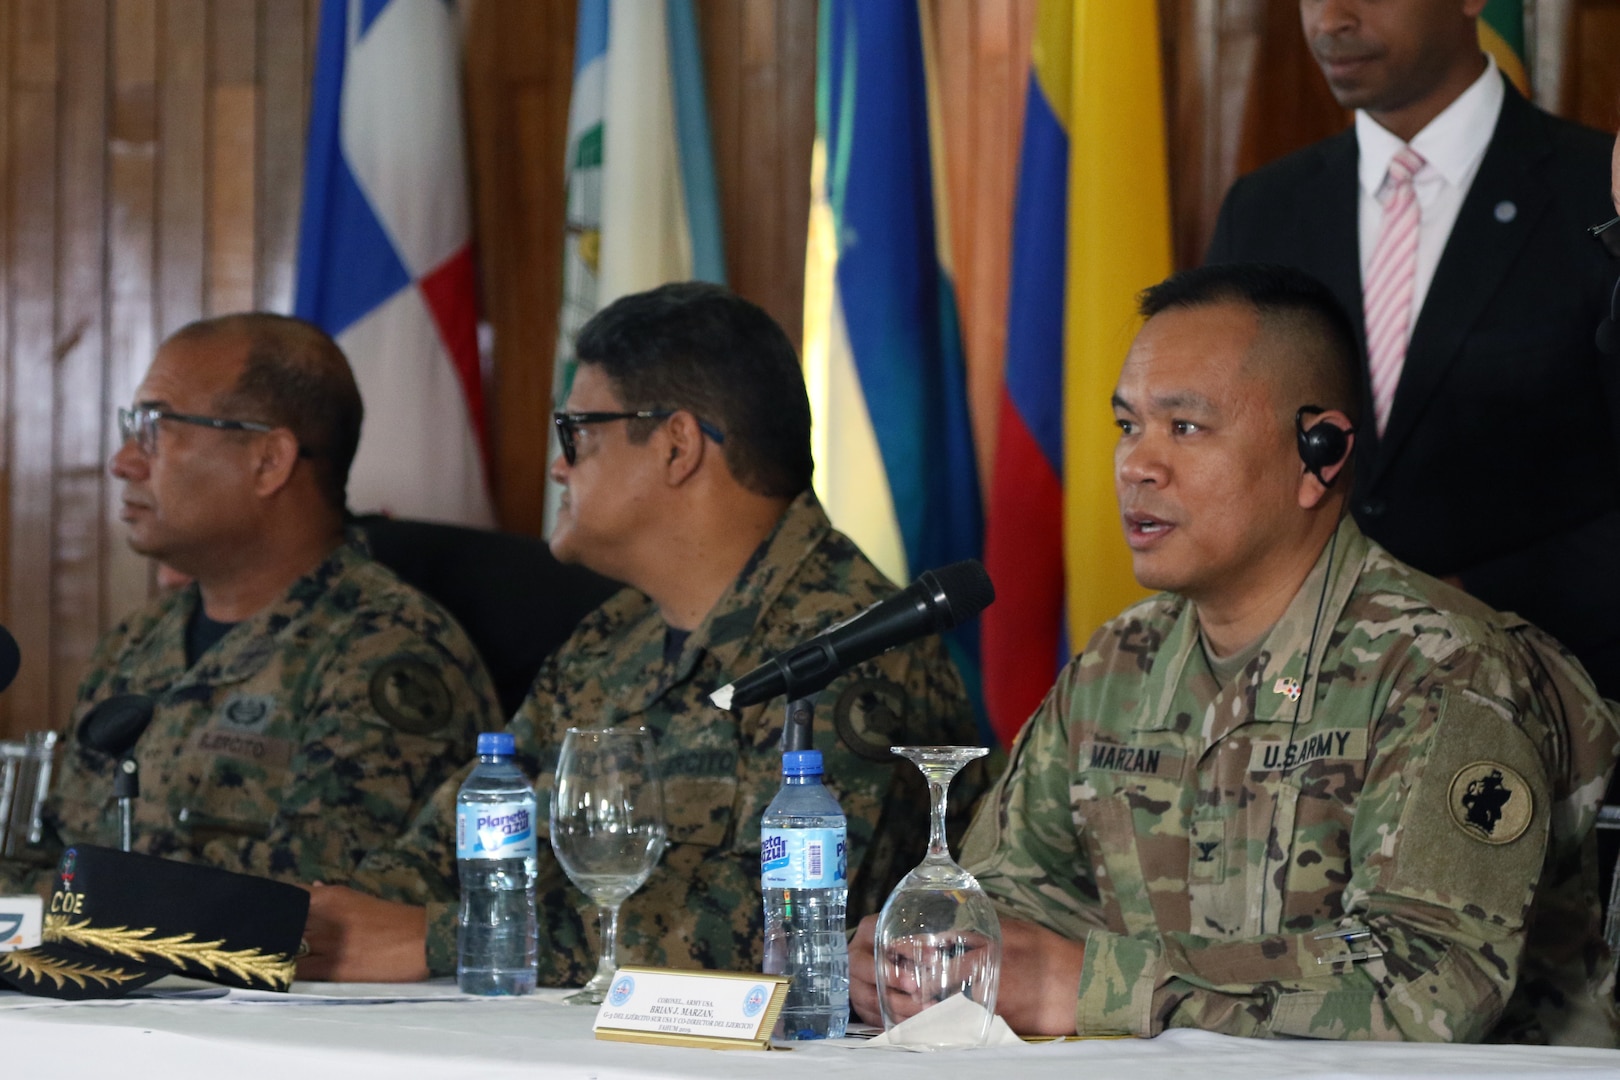 U.S. Army Col. Brian Marzan, Division Chief of U.S. Army South Training and Exercises and co-director of Fuerzas Aliadas Humanitarias 2019, answers media questions at the opening ceremony of FA-HUM 19.